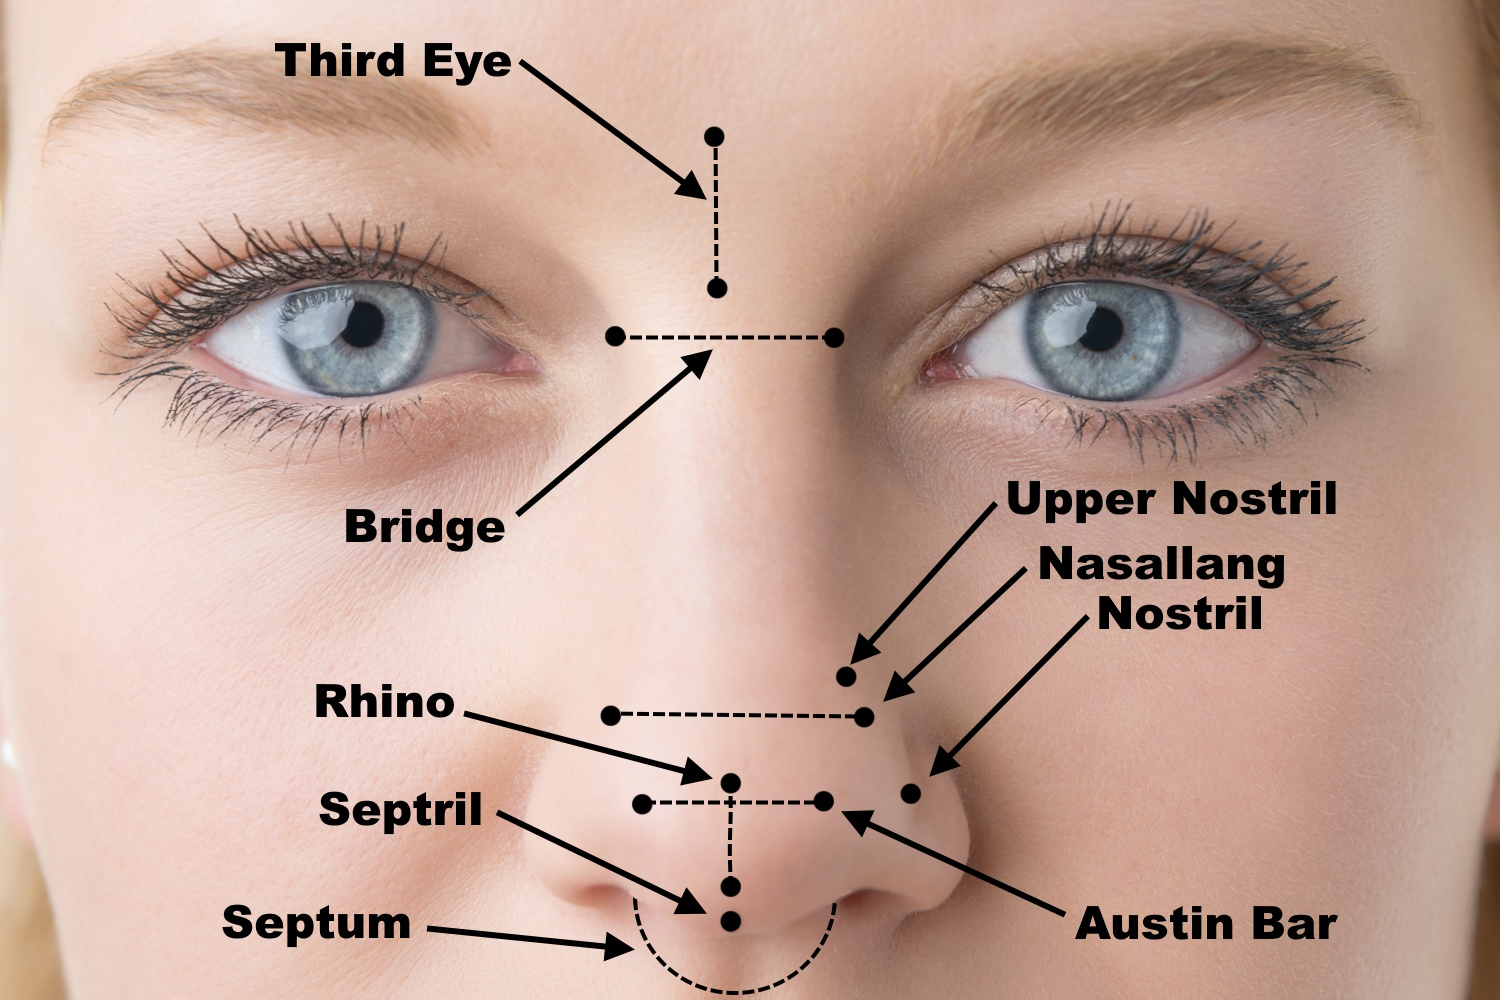 A diagram of the locations of nose piercings.